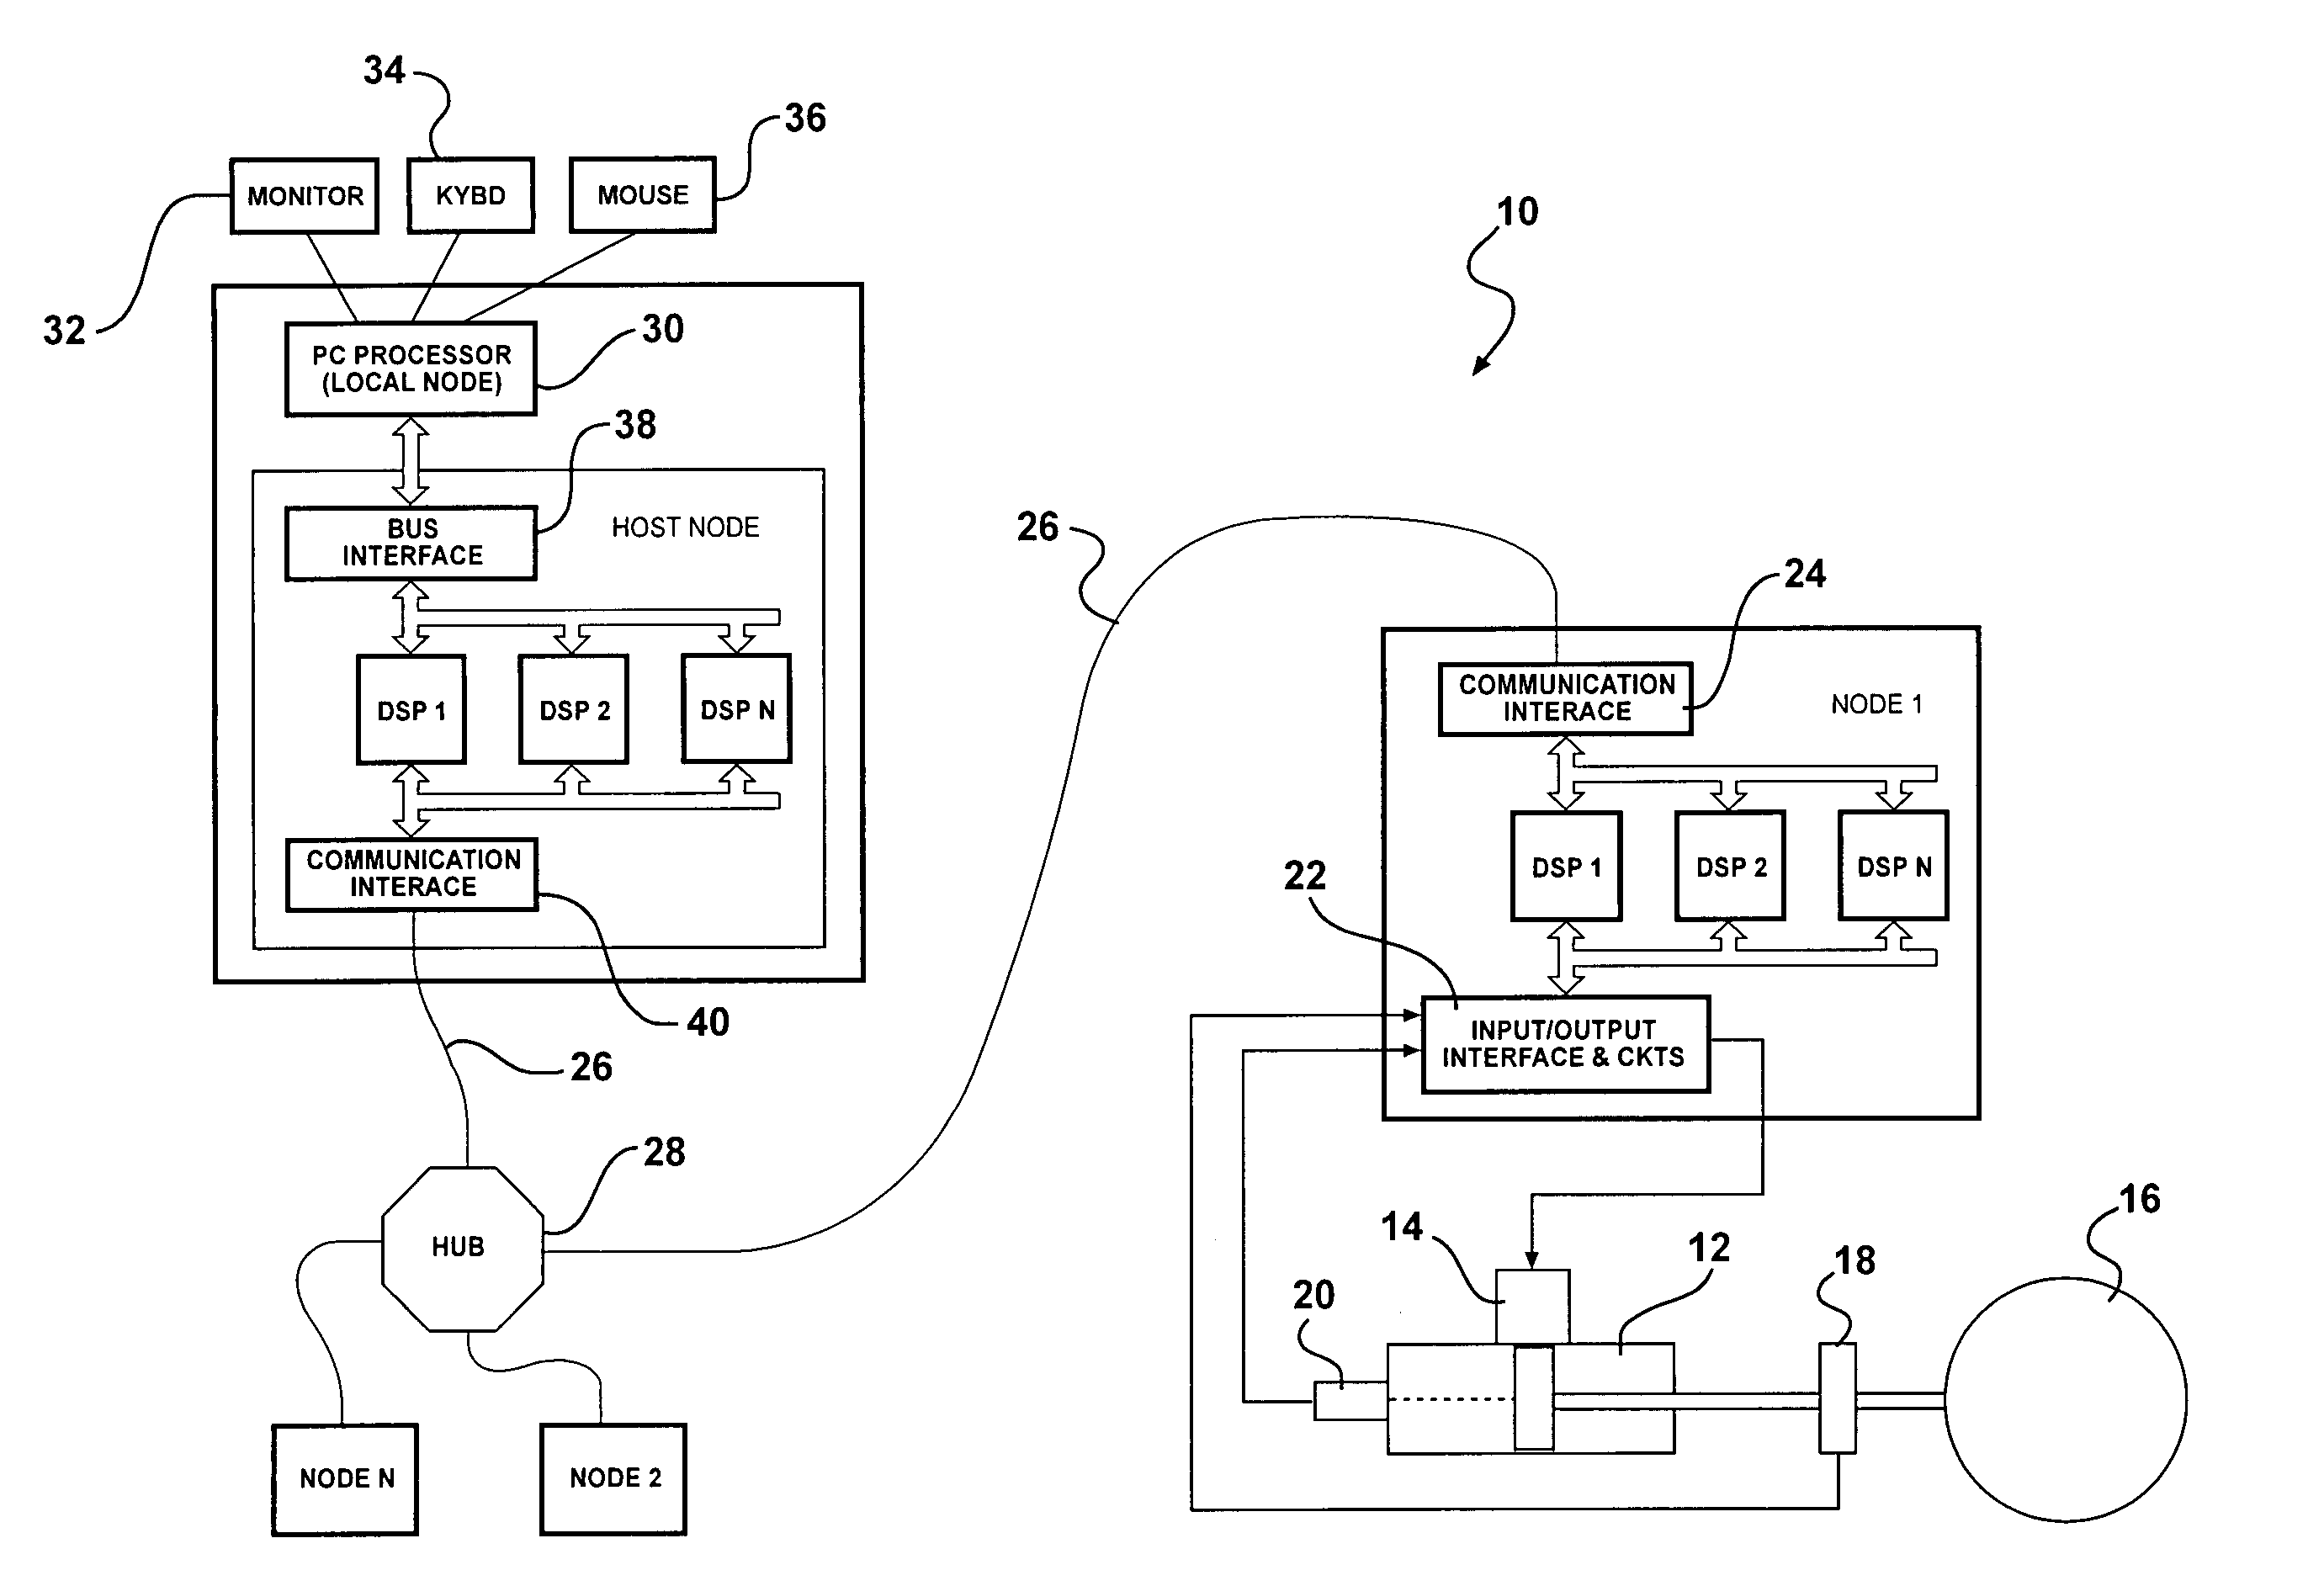 Method of programming a processing system